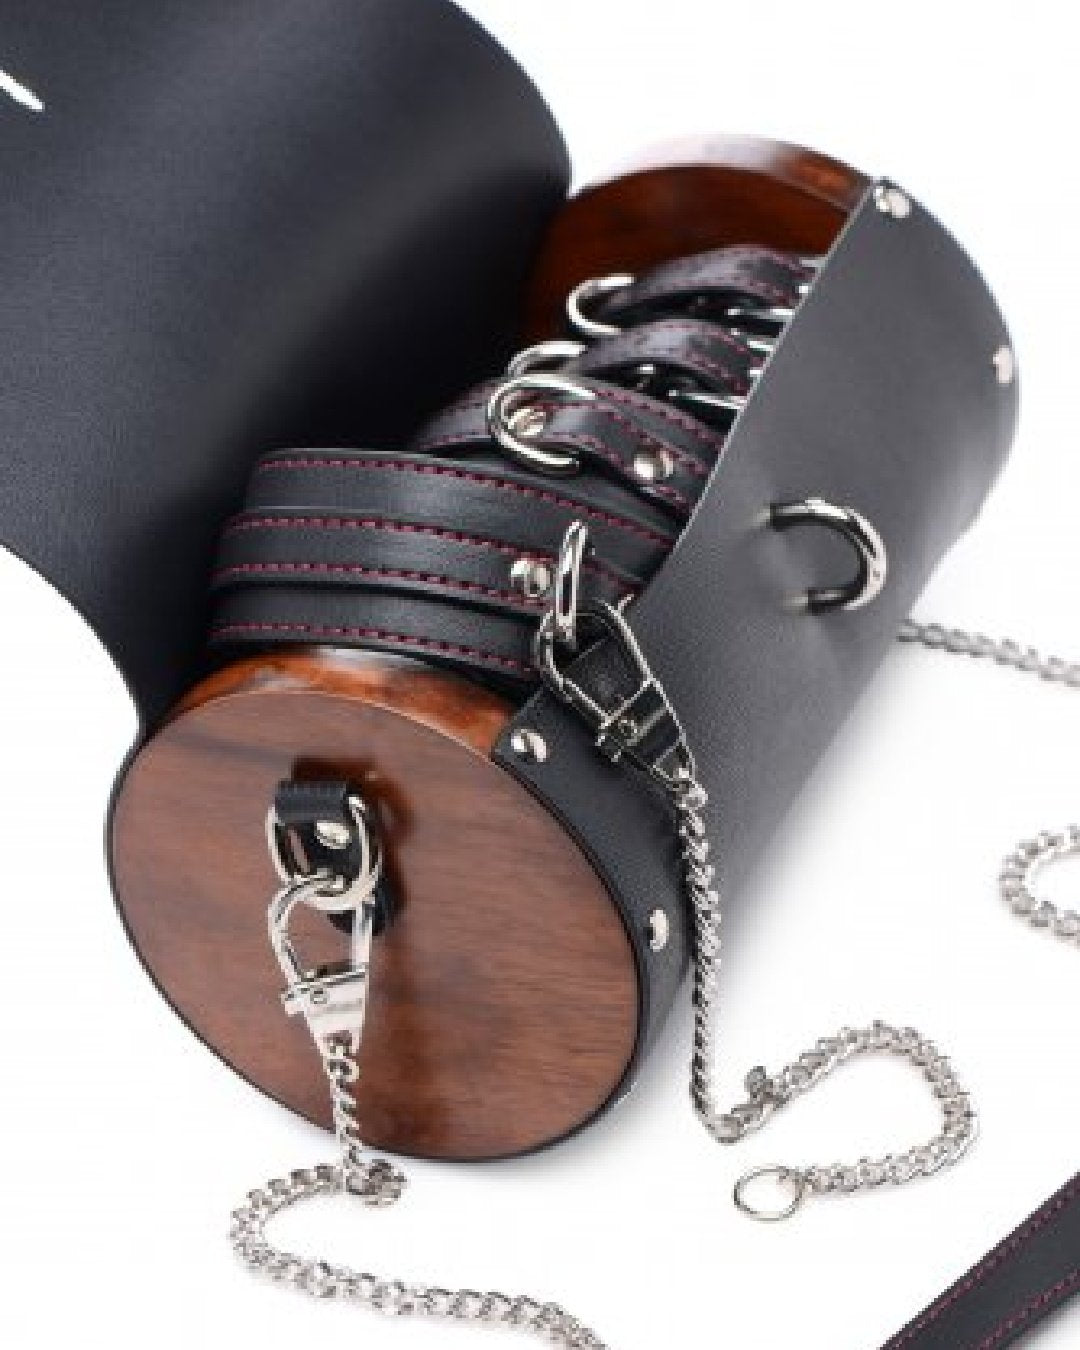 Kinky Clutch Black Bondage Set With Carrying Case showing the case open to reveals cuffs inside